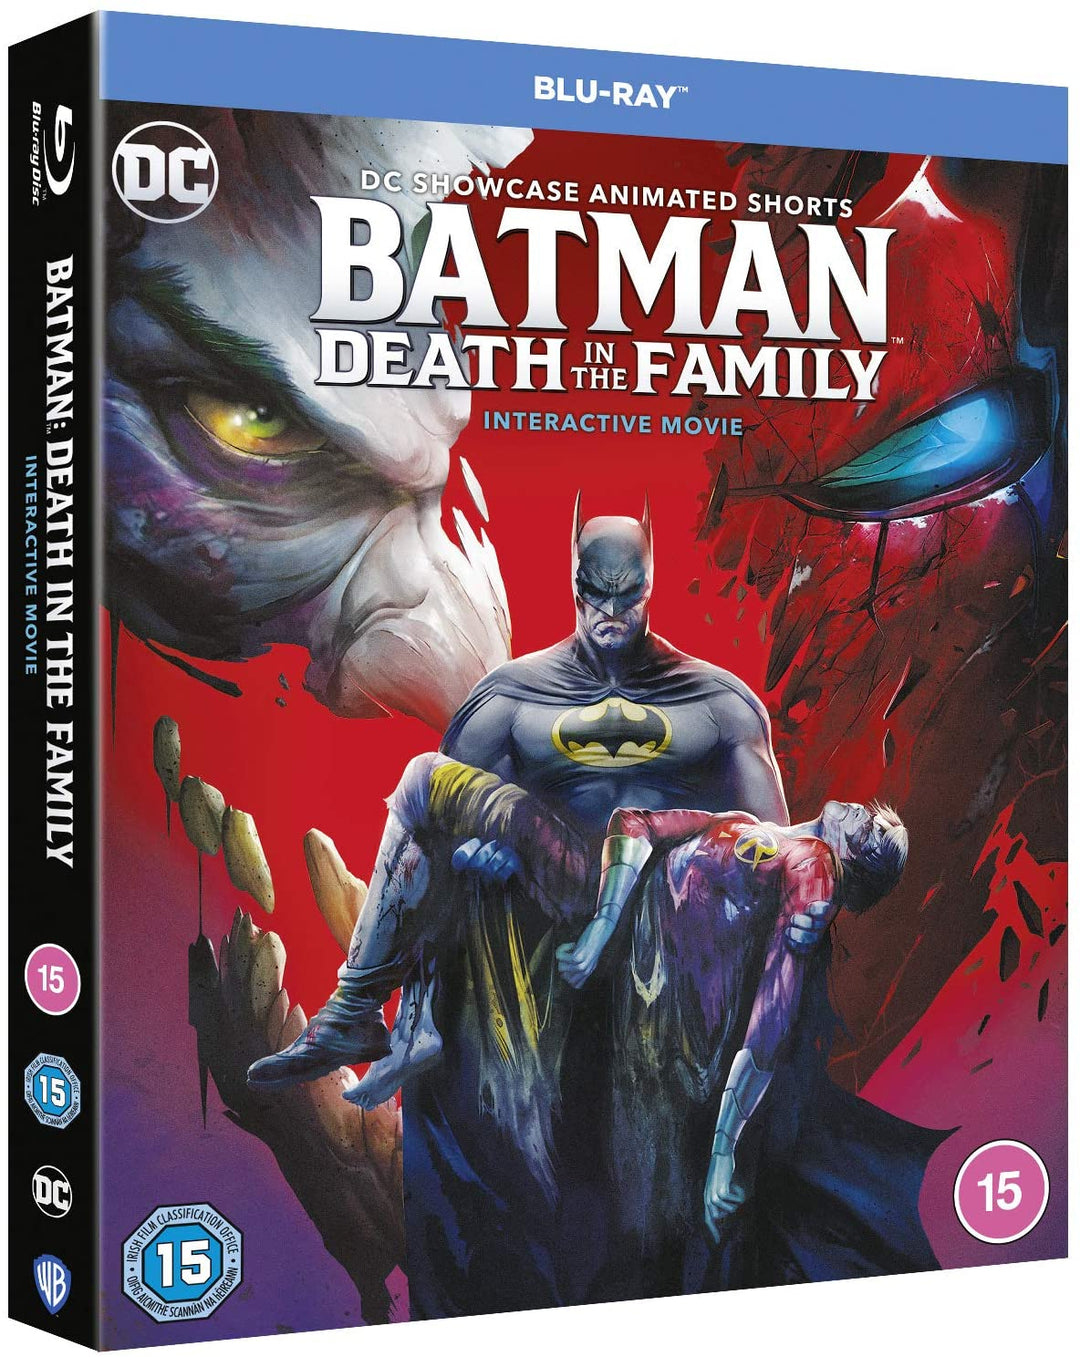 Batman: Death in the Family [2019] [Region Free] – Action/Animation [Blu-ray]